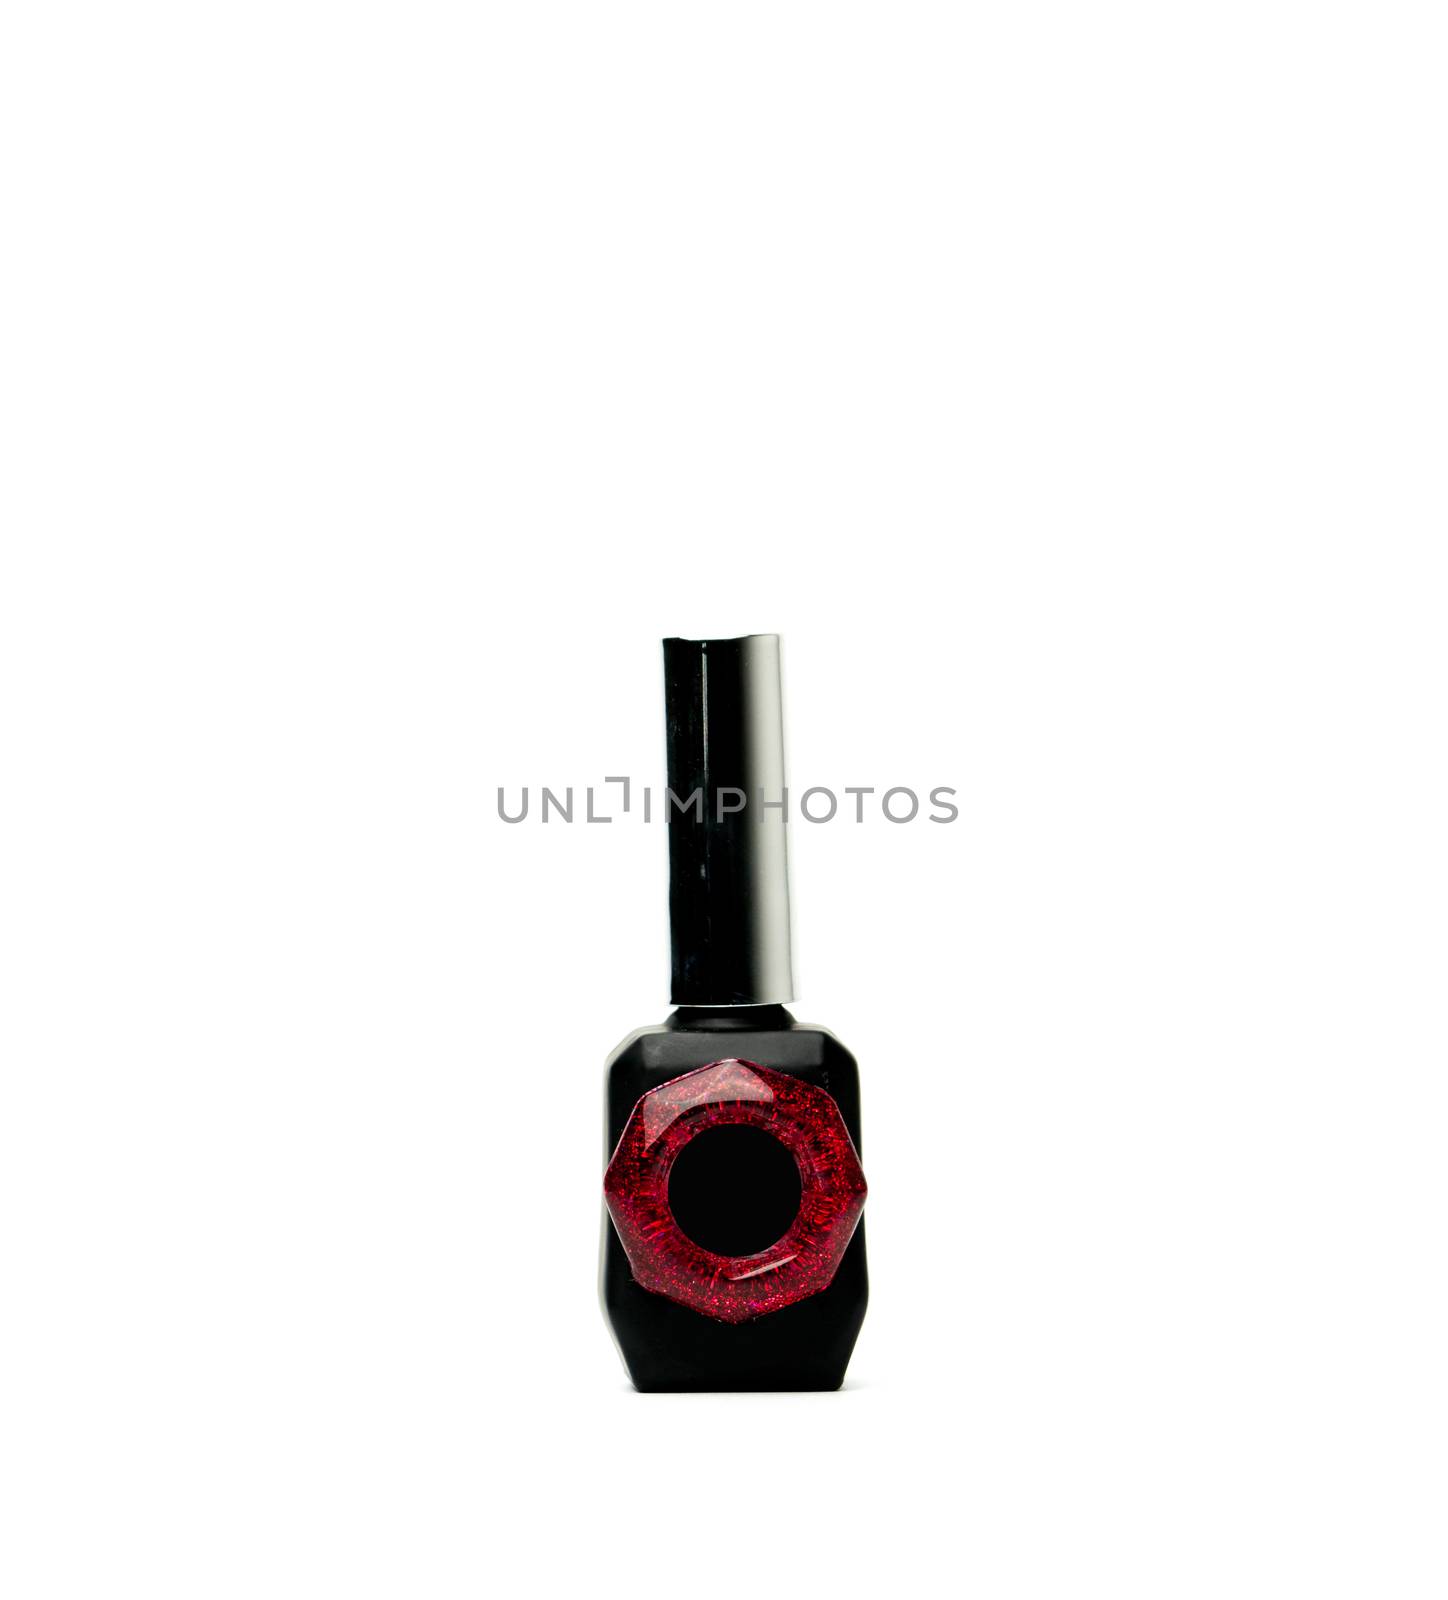 Unique nail polish bottle isolated on white background with copy space and blank label, just add your own text by Fahroni